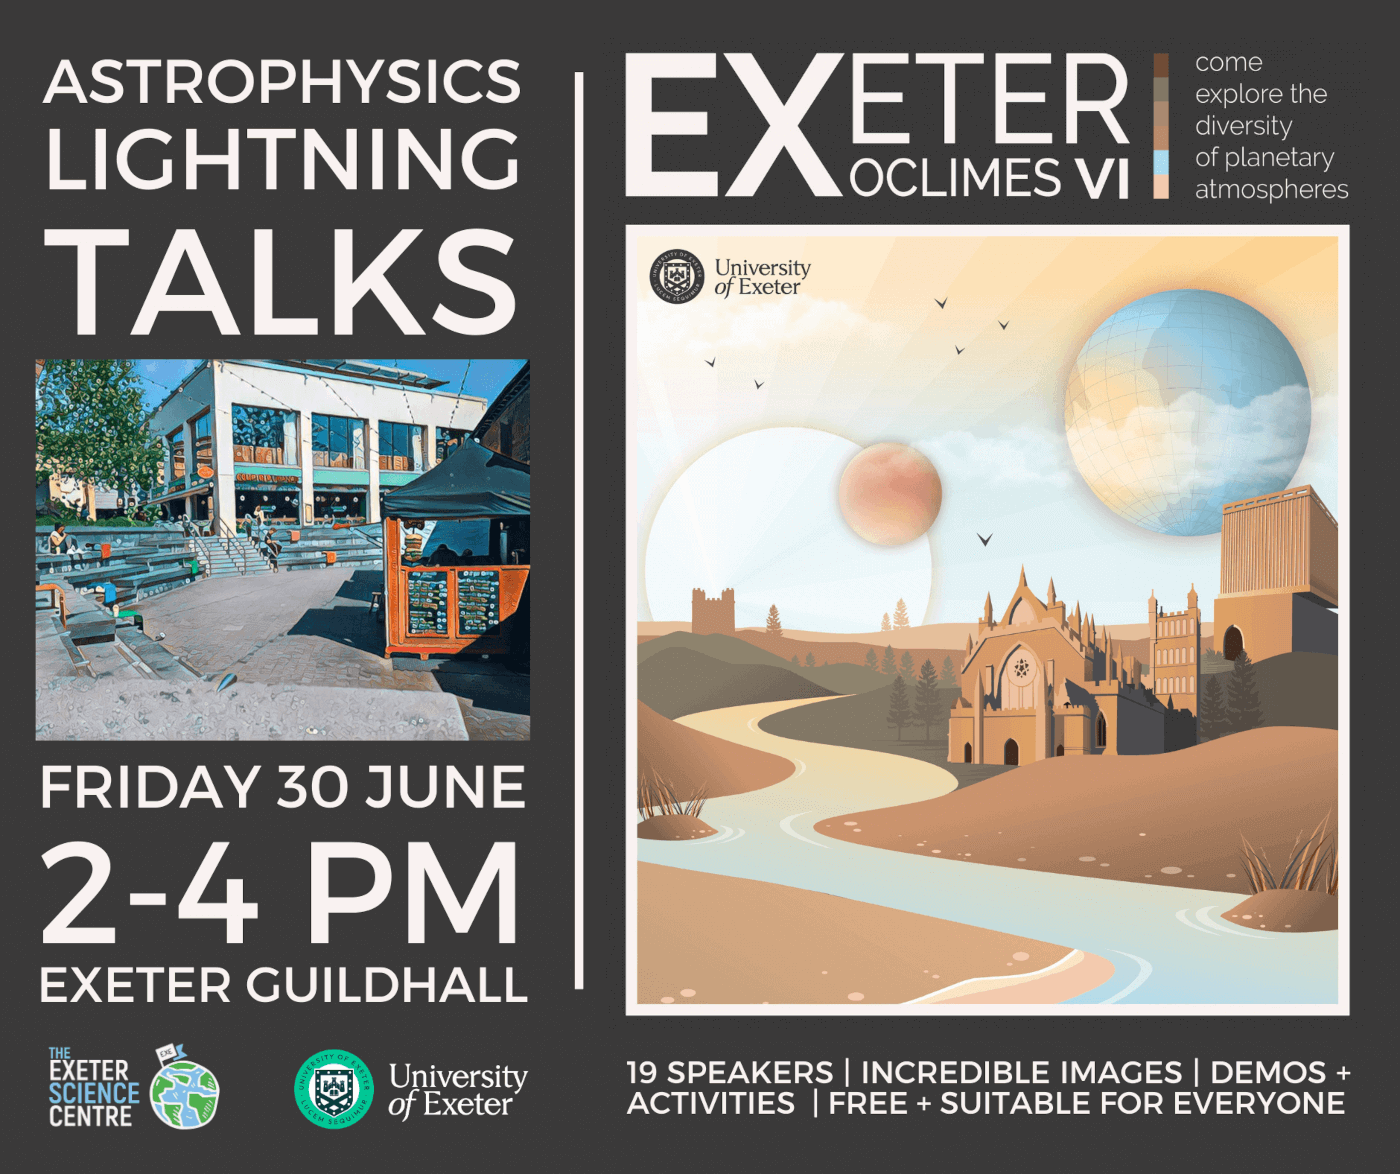 Exoclimes Lightning Talks. Friday 30 June, 2-4 PM, Exeter Guild Hall. Come explore the diversity of planetary atmospheres. 19 Speakers. Incredible Images. Demos and Activities. Free and suitable for everyone